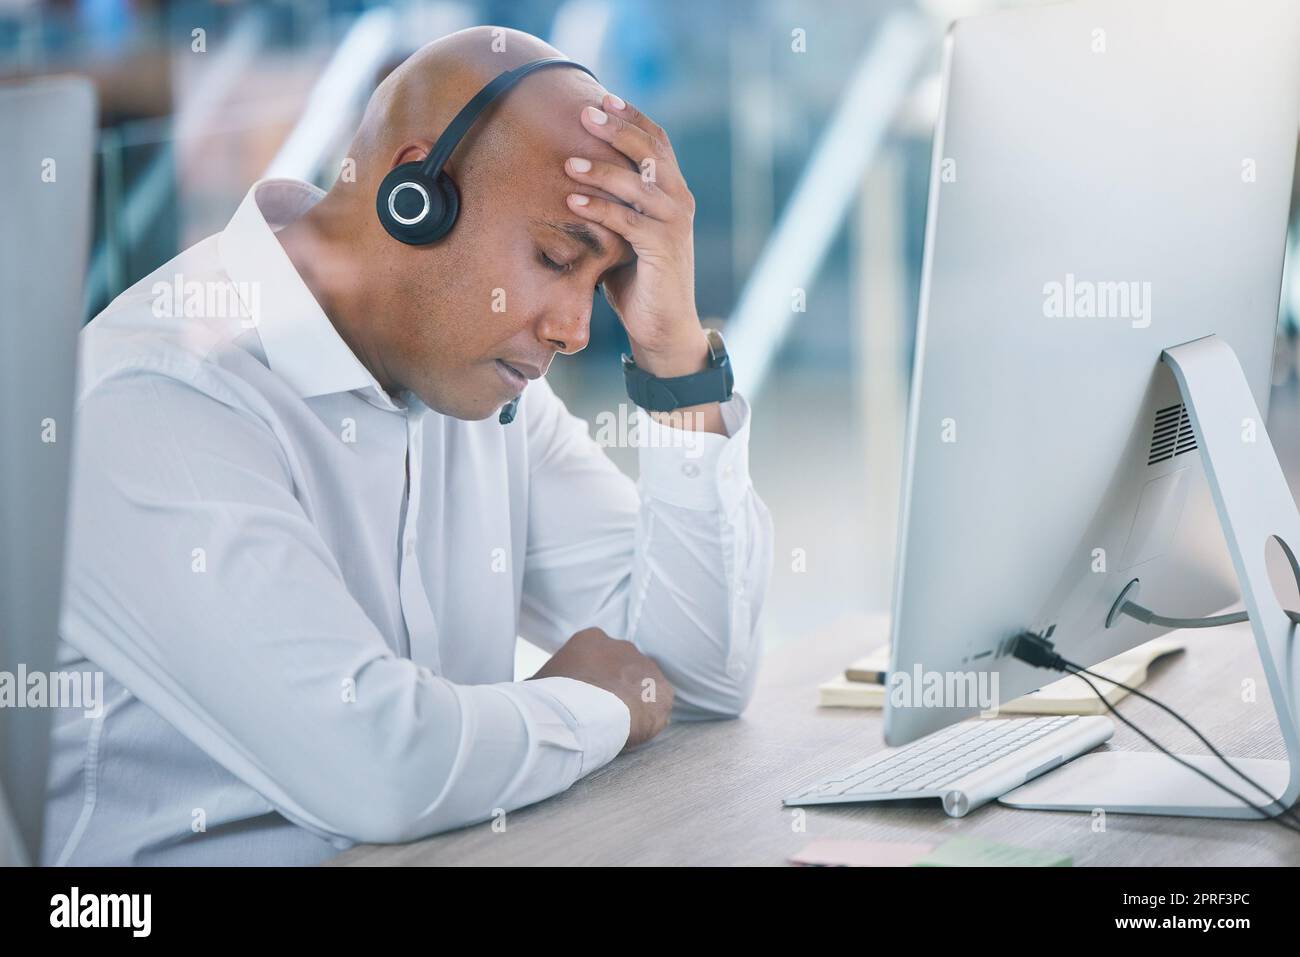 Stressed, tired and headache of working sales consultant, call center agent or customer service advisor. Overworked, worried or frustrated phone operator employee at contact us helpdesk agency Stock Photo